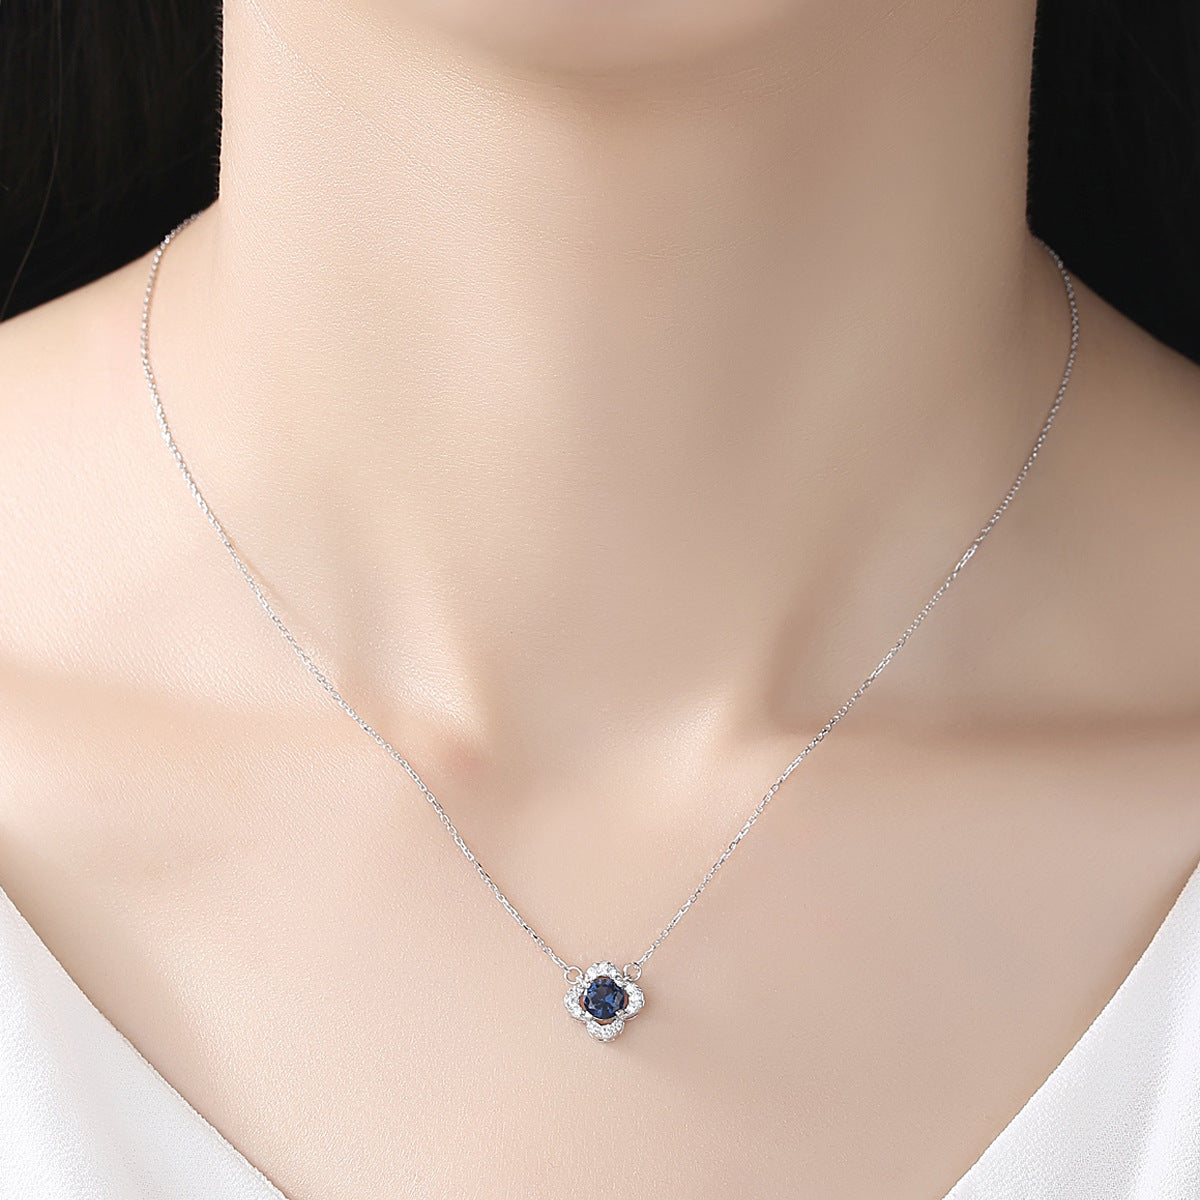 Gemstonely- S925 Silver Necklace with Created Sapphire Gemstone Pendant in Lucky Four-Leaf Clover Design for Women